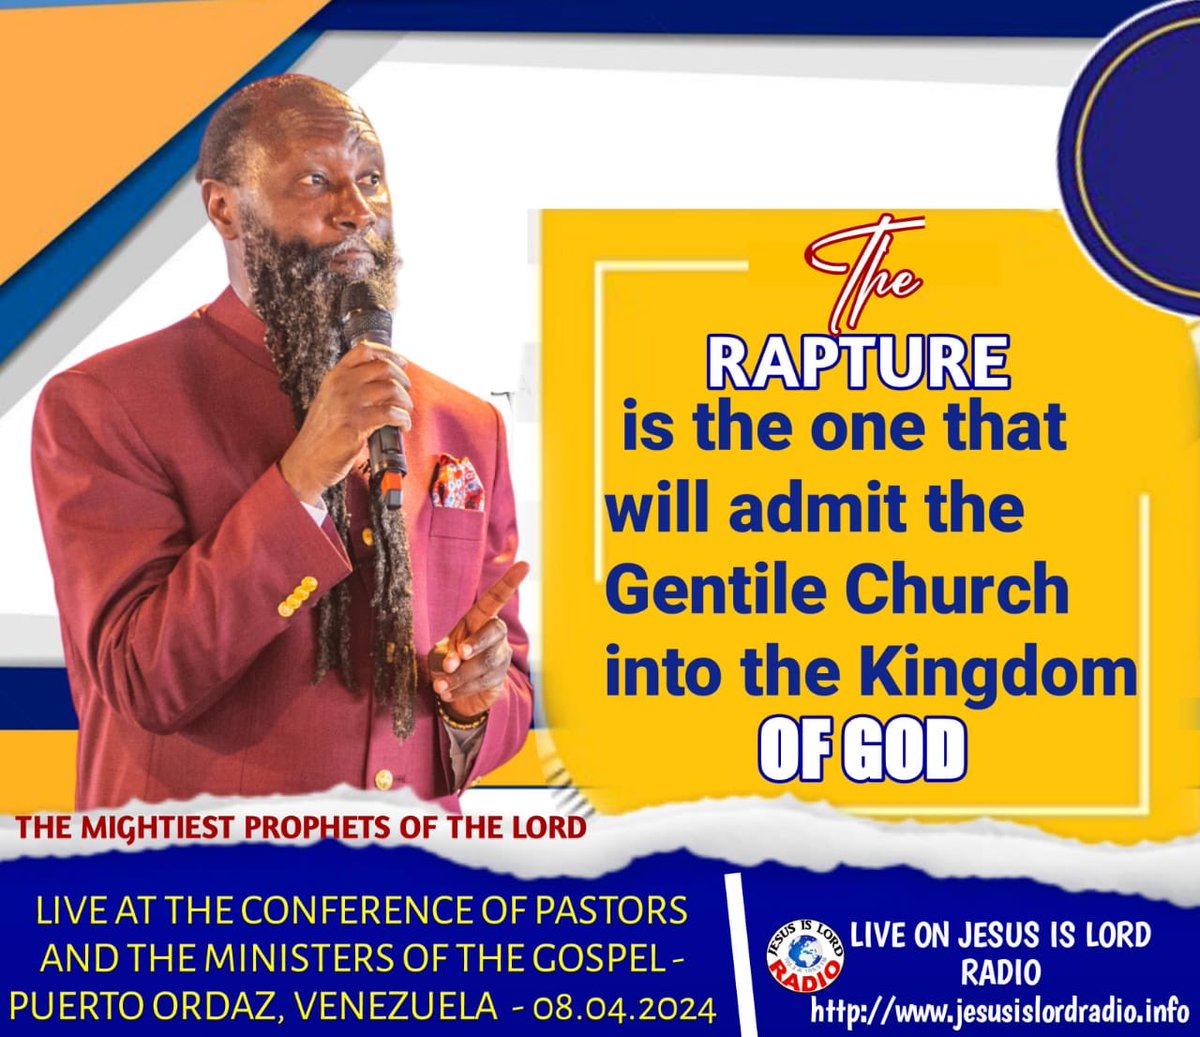 SOON THE CHURCH THAT IS TAKING PEOPLE FROM THE LAKE OF FIRE WILL BE TAKEN AWAY AT RAPTURE! THE MESSIAH IS COMING IN HIS IMMINENCY! WHAT WILL YOU TELL THE MESSIAH IF YOU DO NOT PREPARE? REPENT THEN IN CHRIST JESUS NOW, BE HOLY & BE RIGHTEOUS. TIME IS OVER #FlowingLiquidGlory